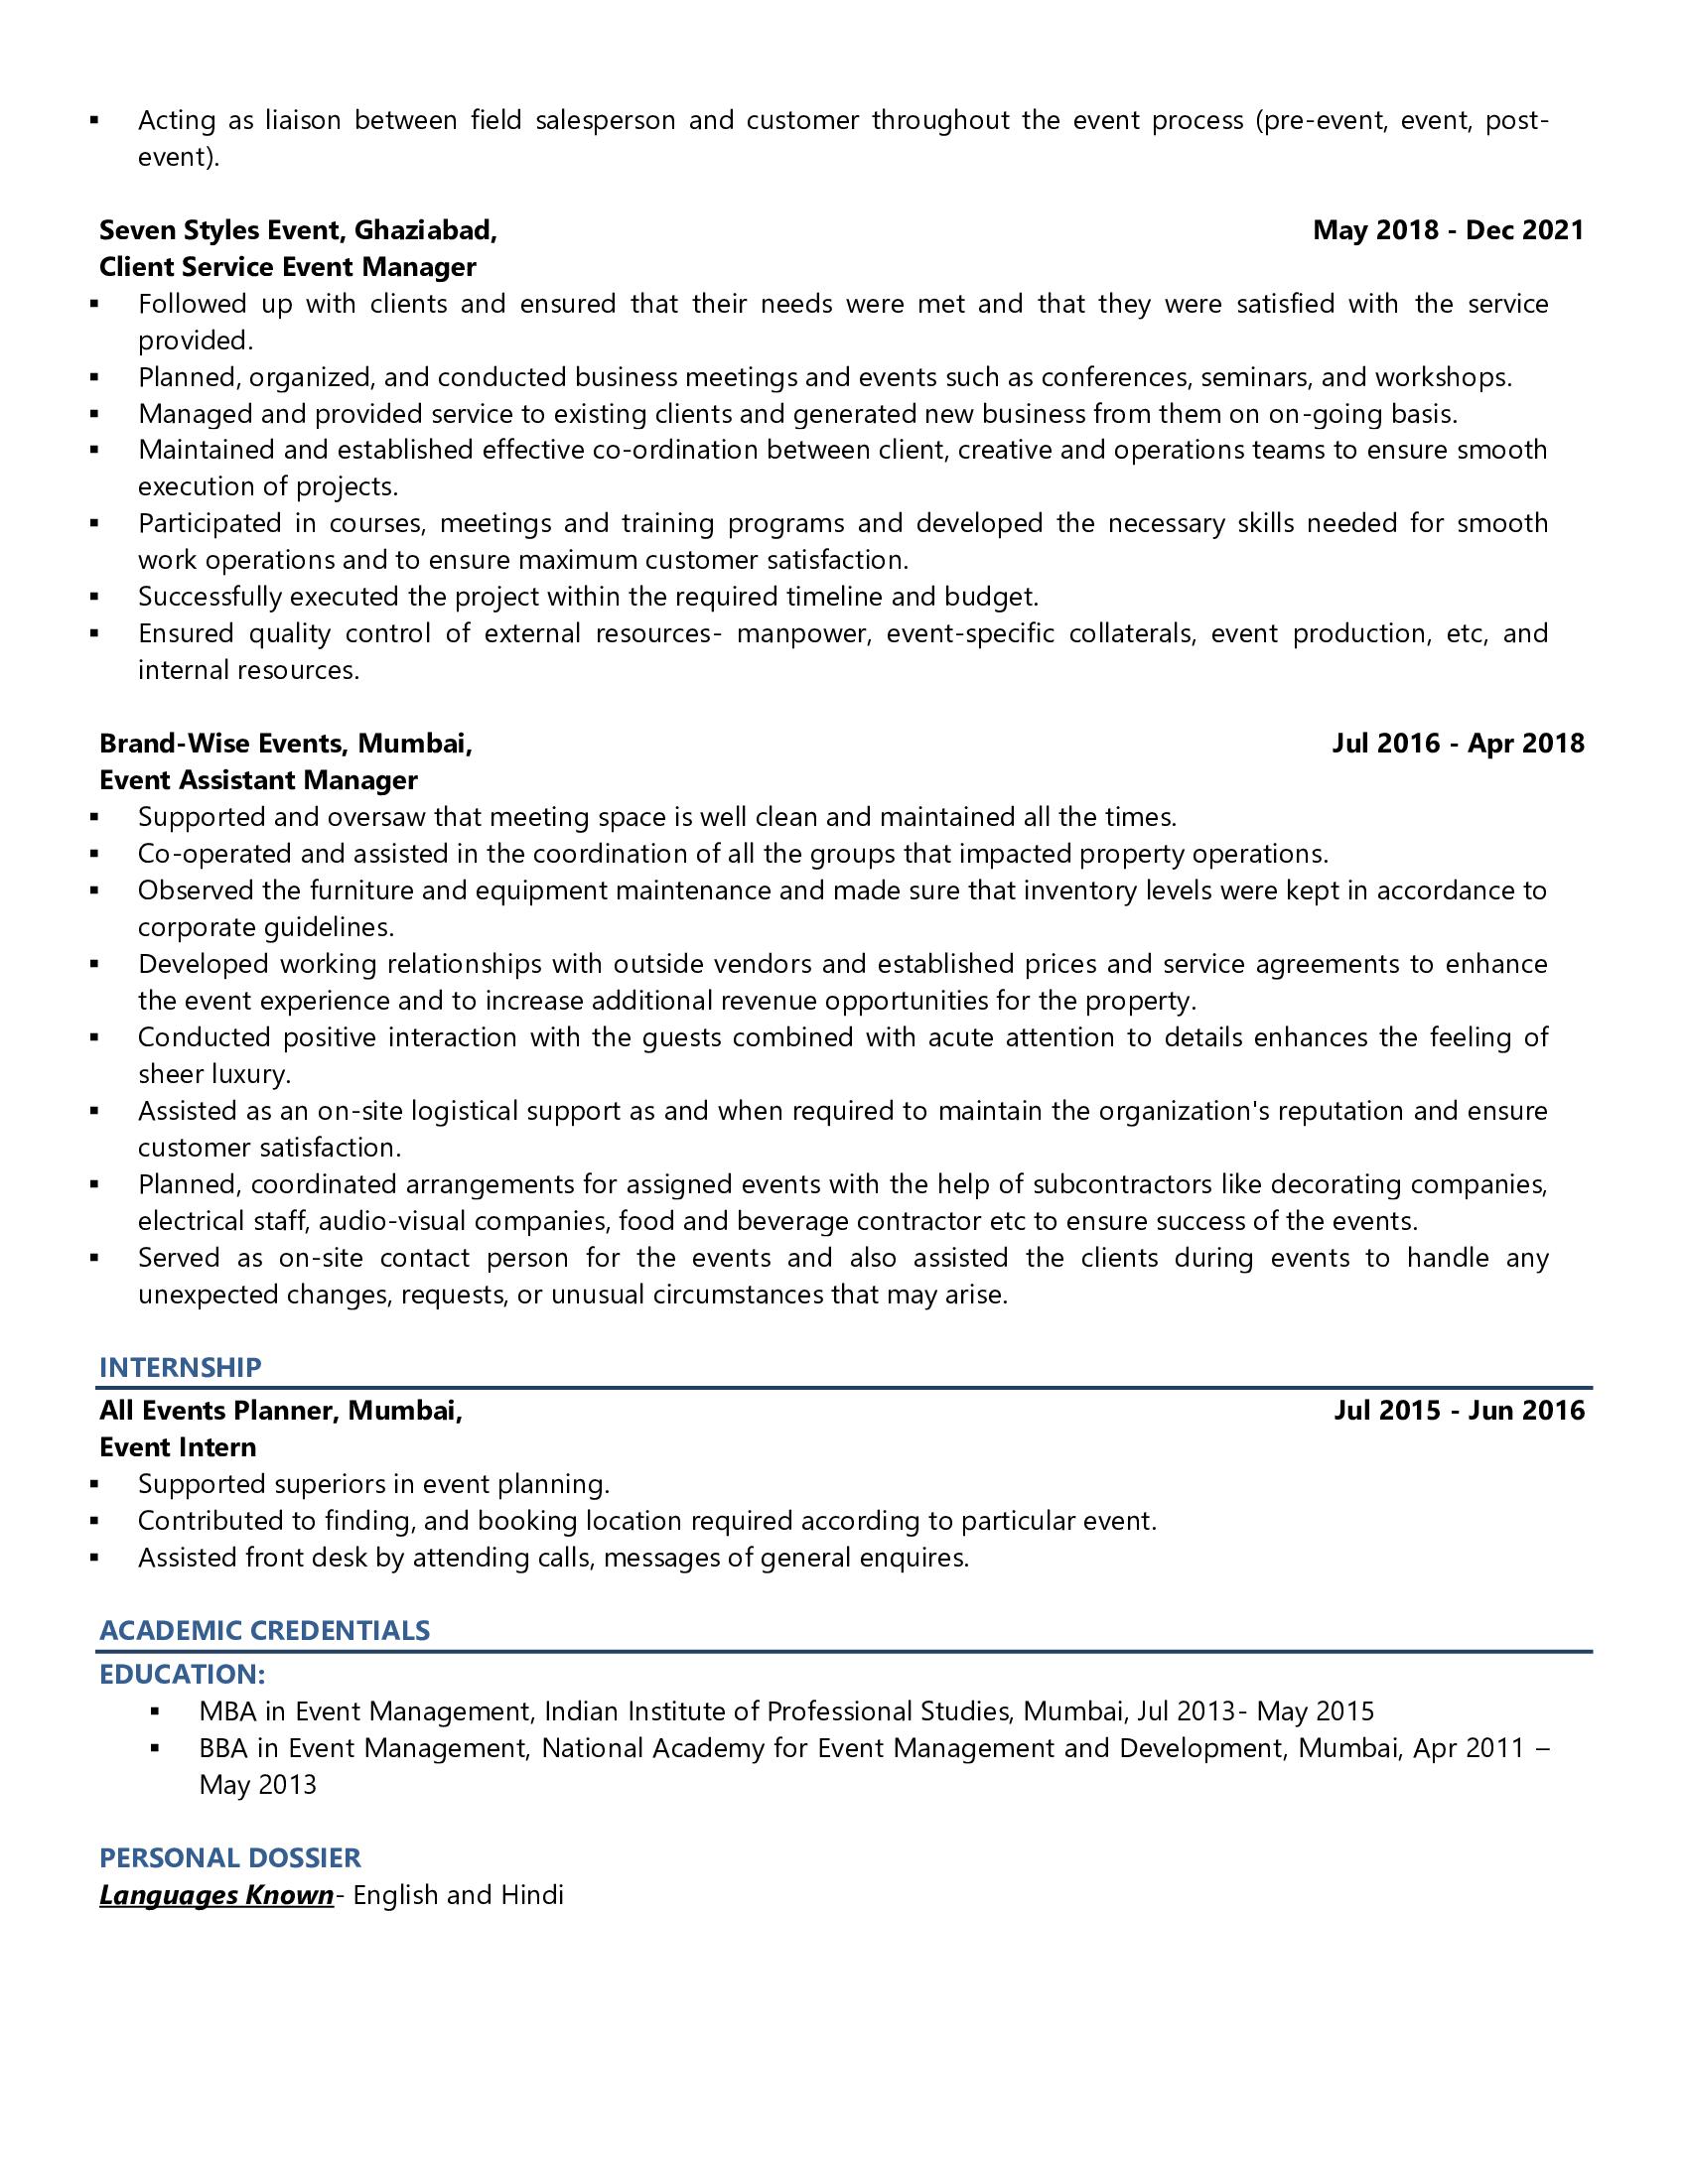 Event Manager - Resume Example & Template